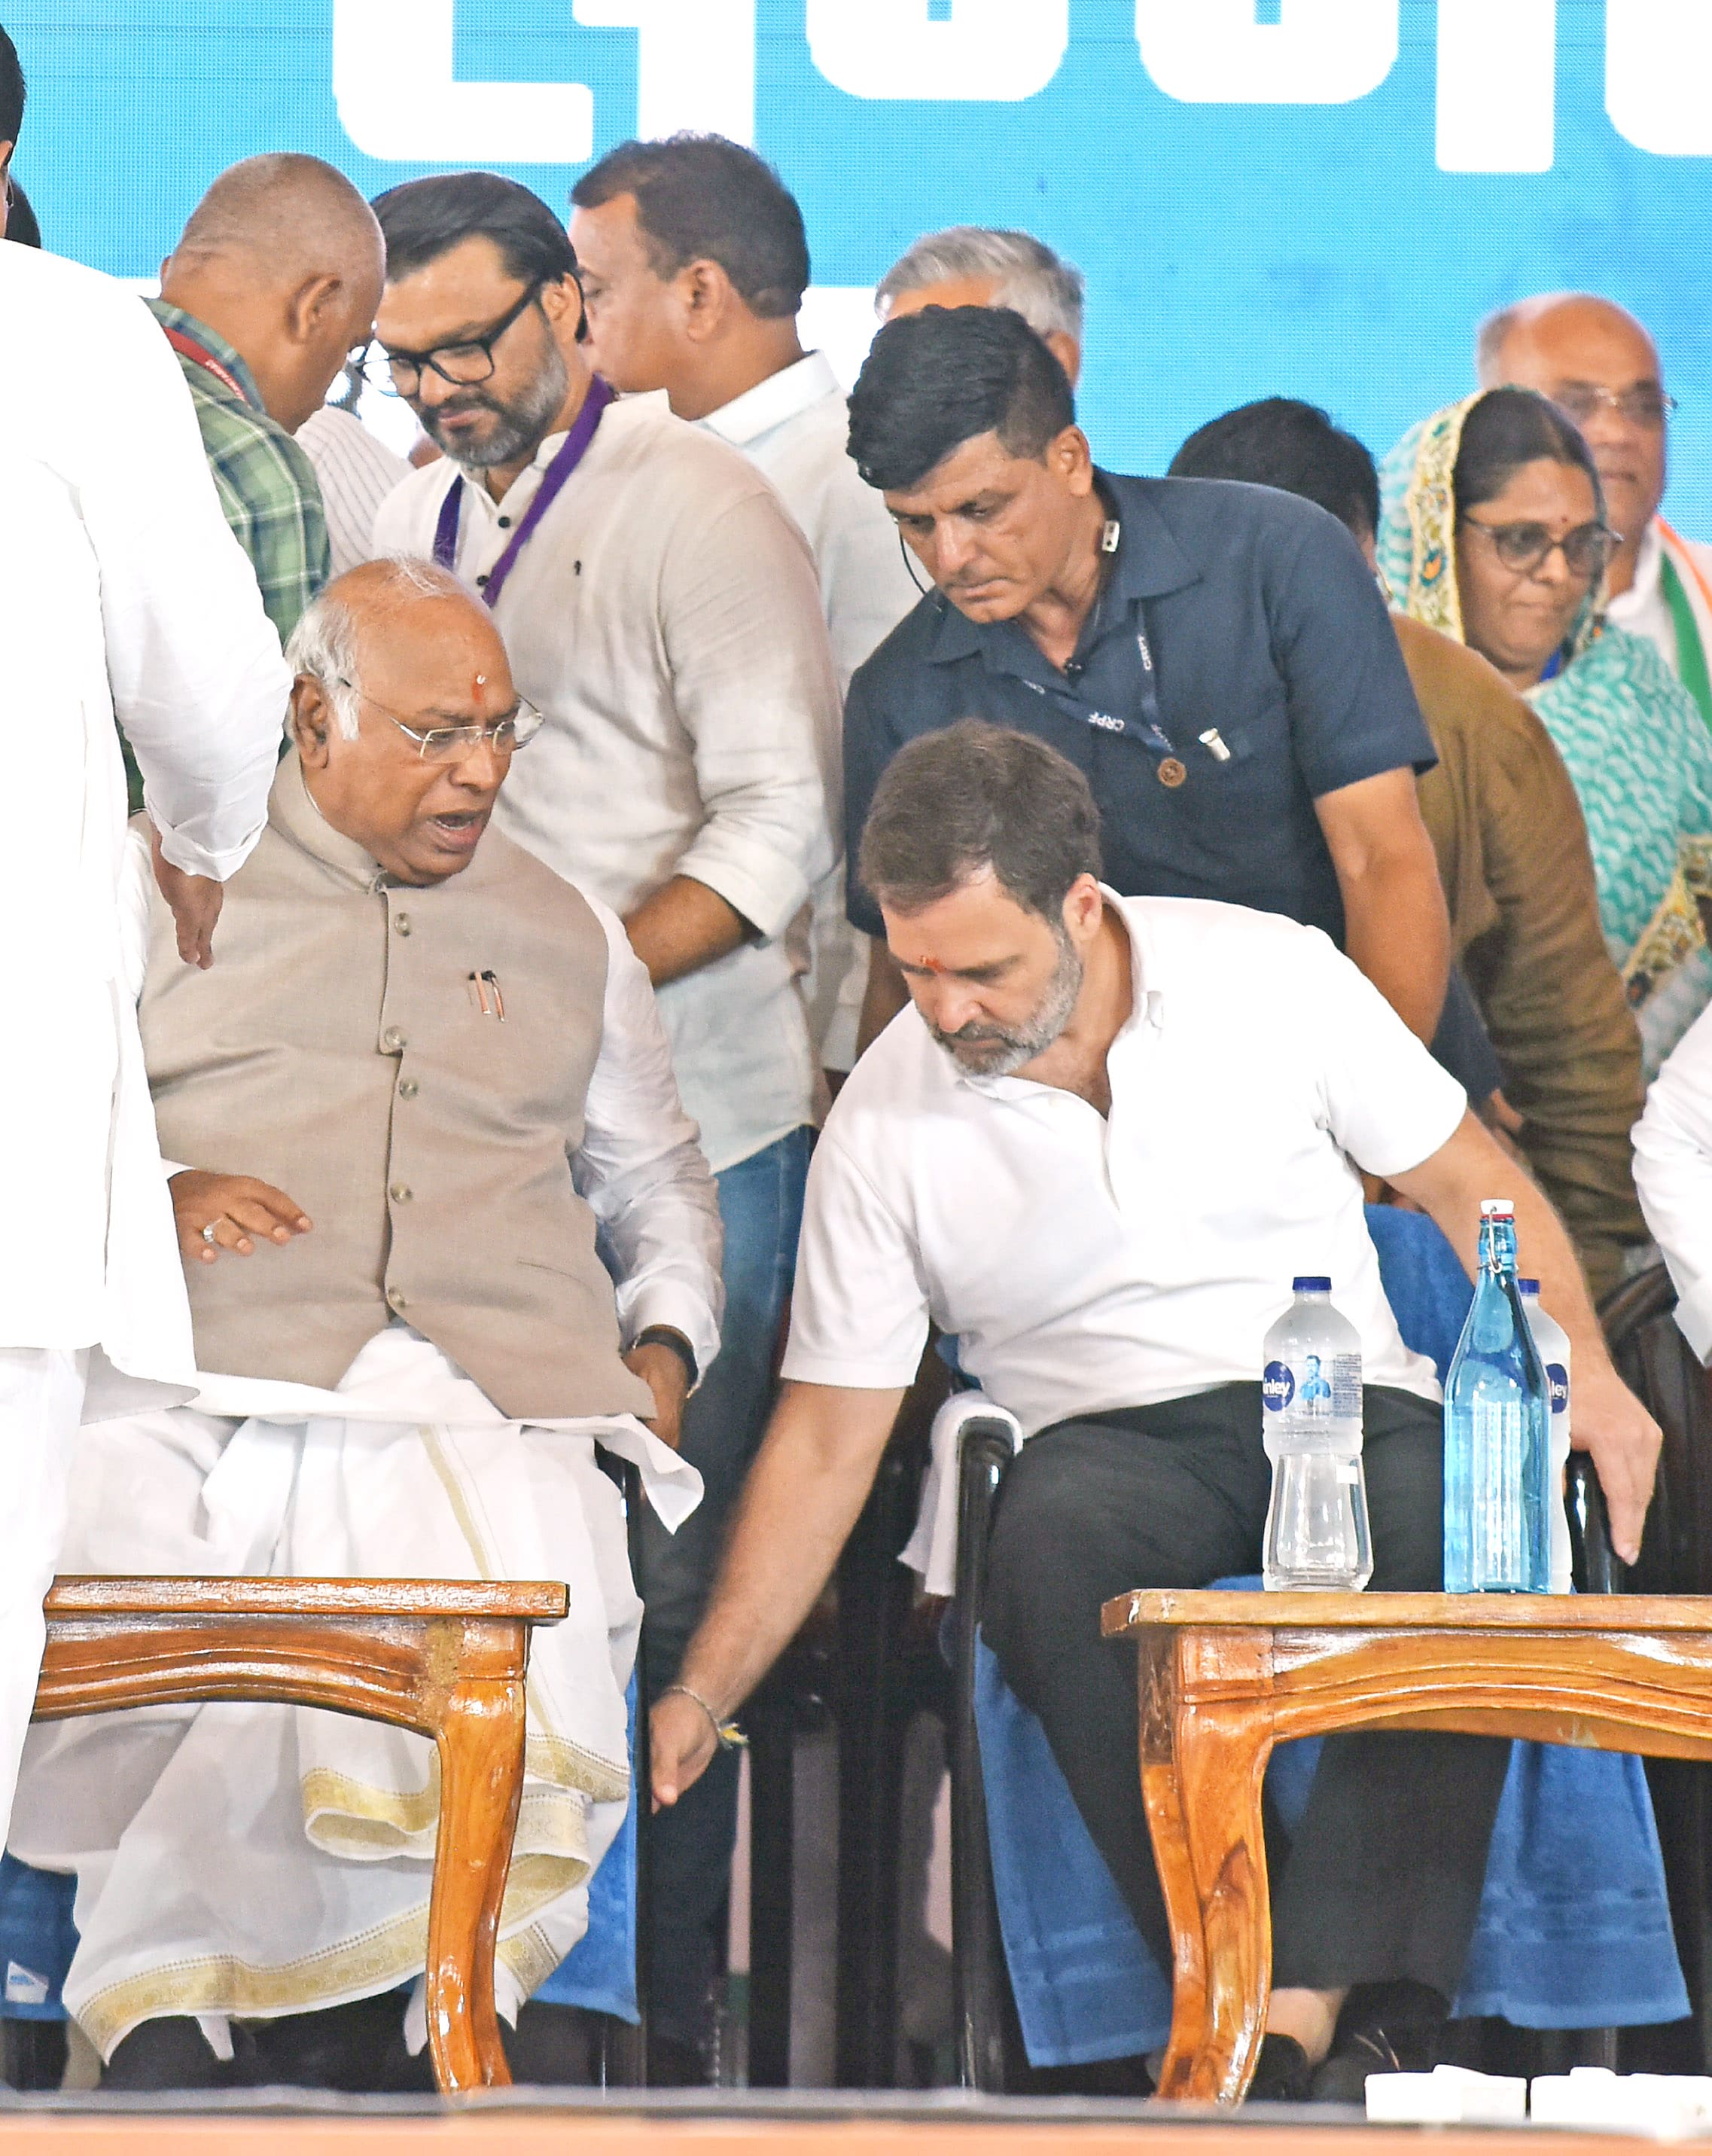 Rahul Gandhi checking Mallikarjun Kharge’s chair, which was not stable.